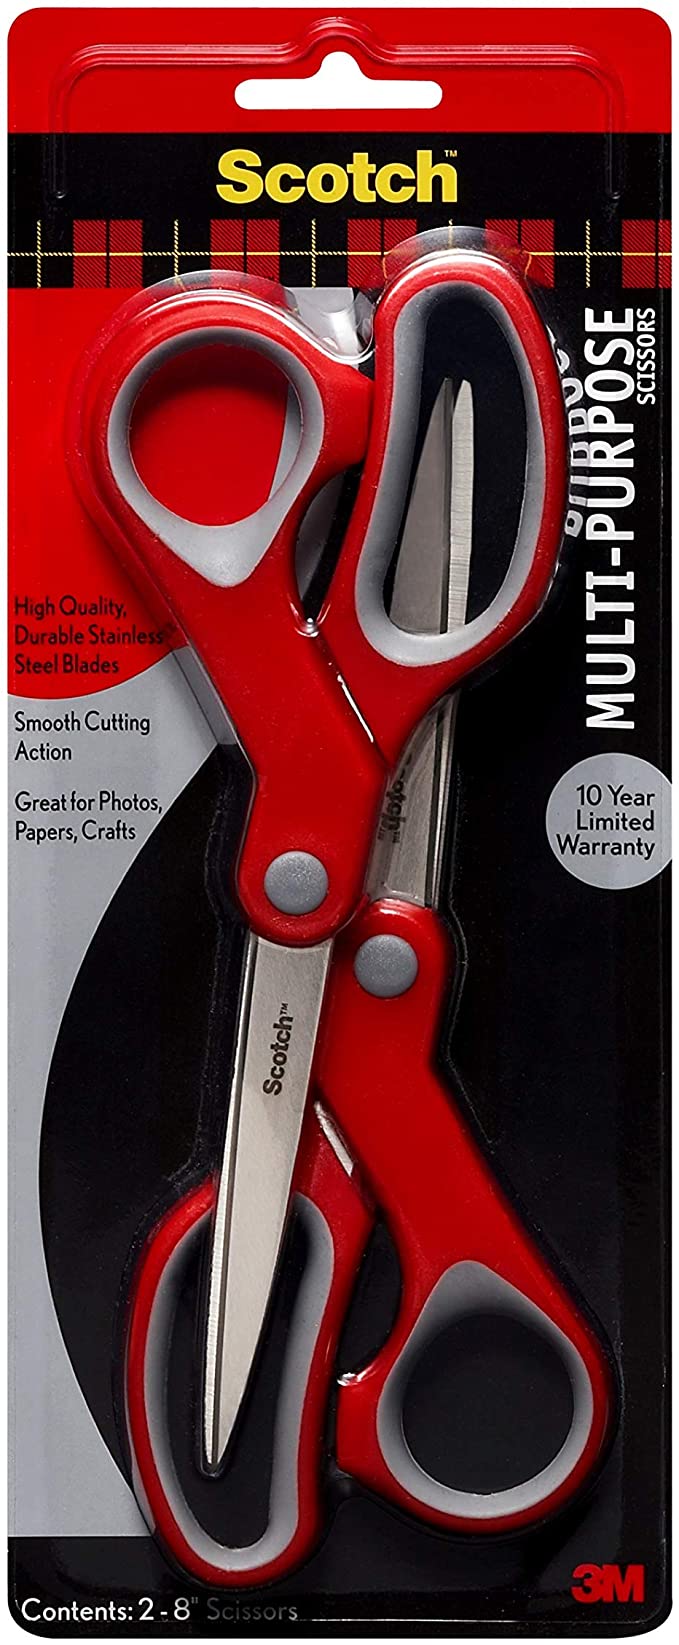 A pack of 2 pairs of red Scotch Scissors.